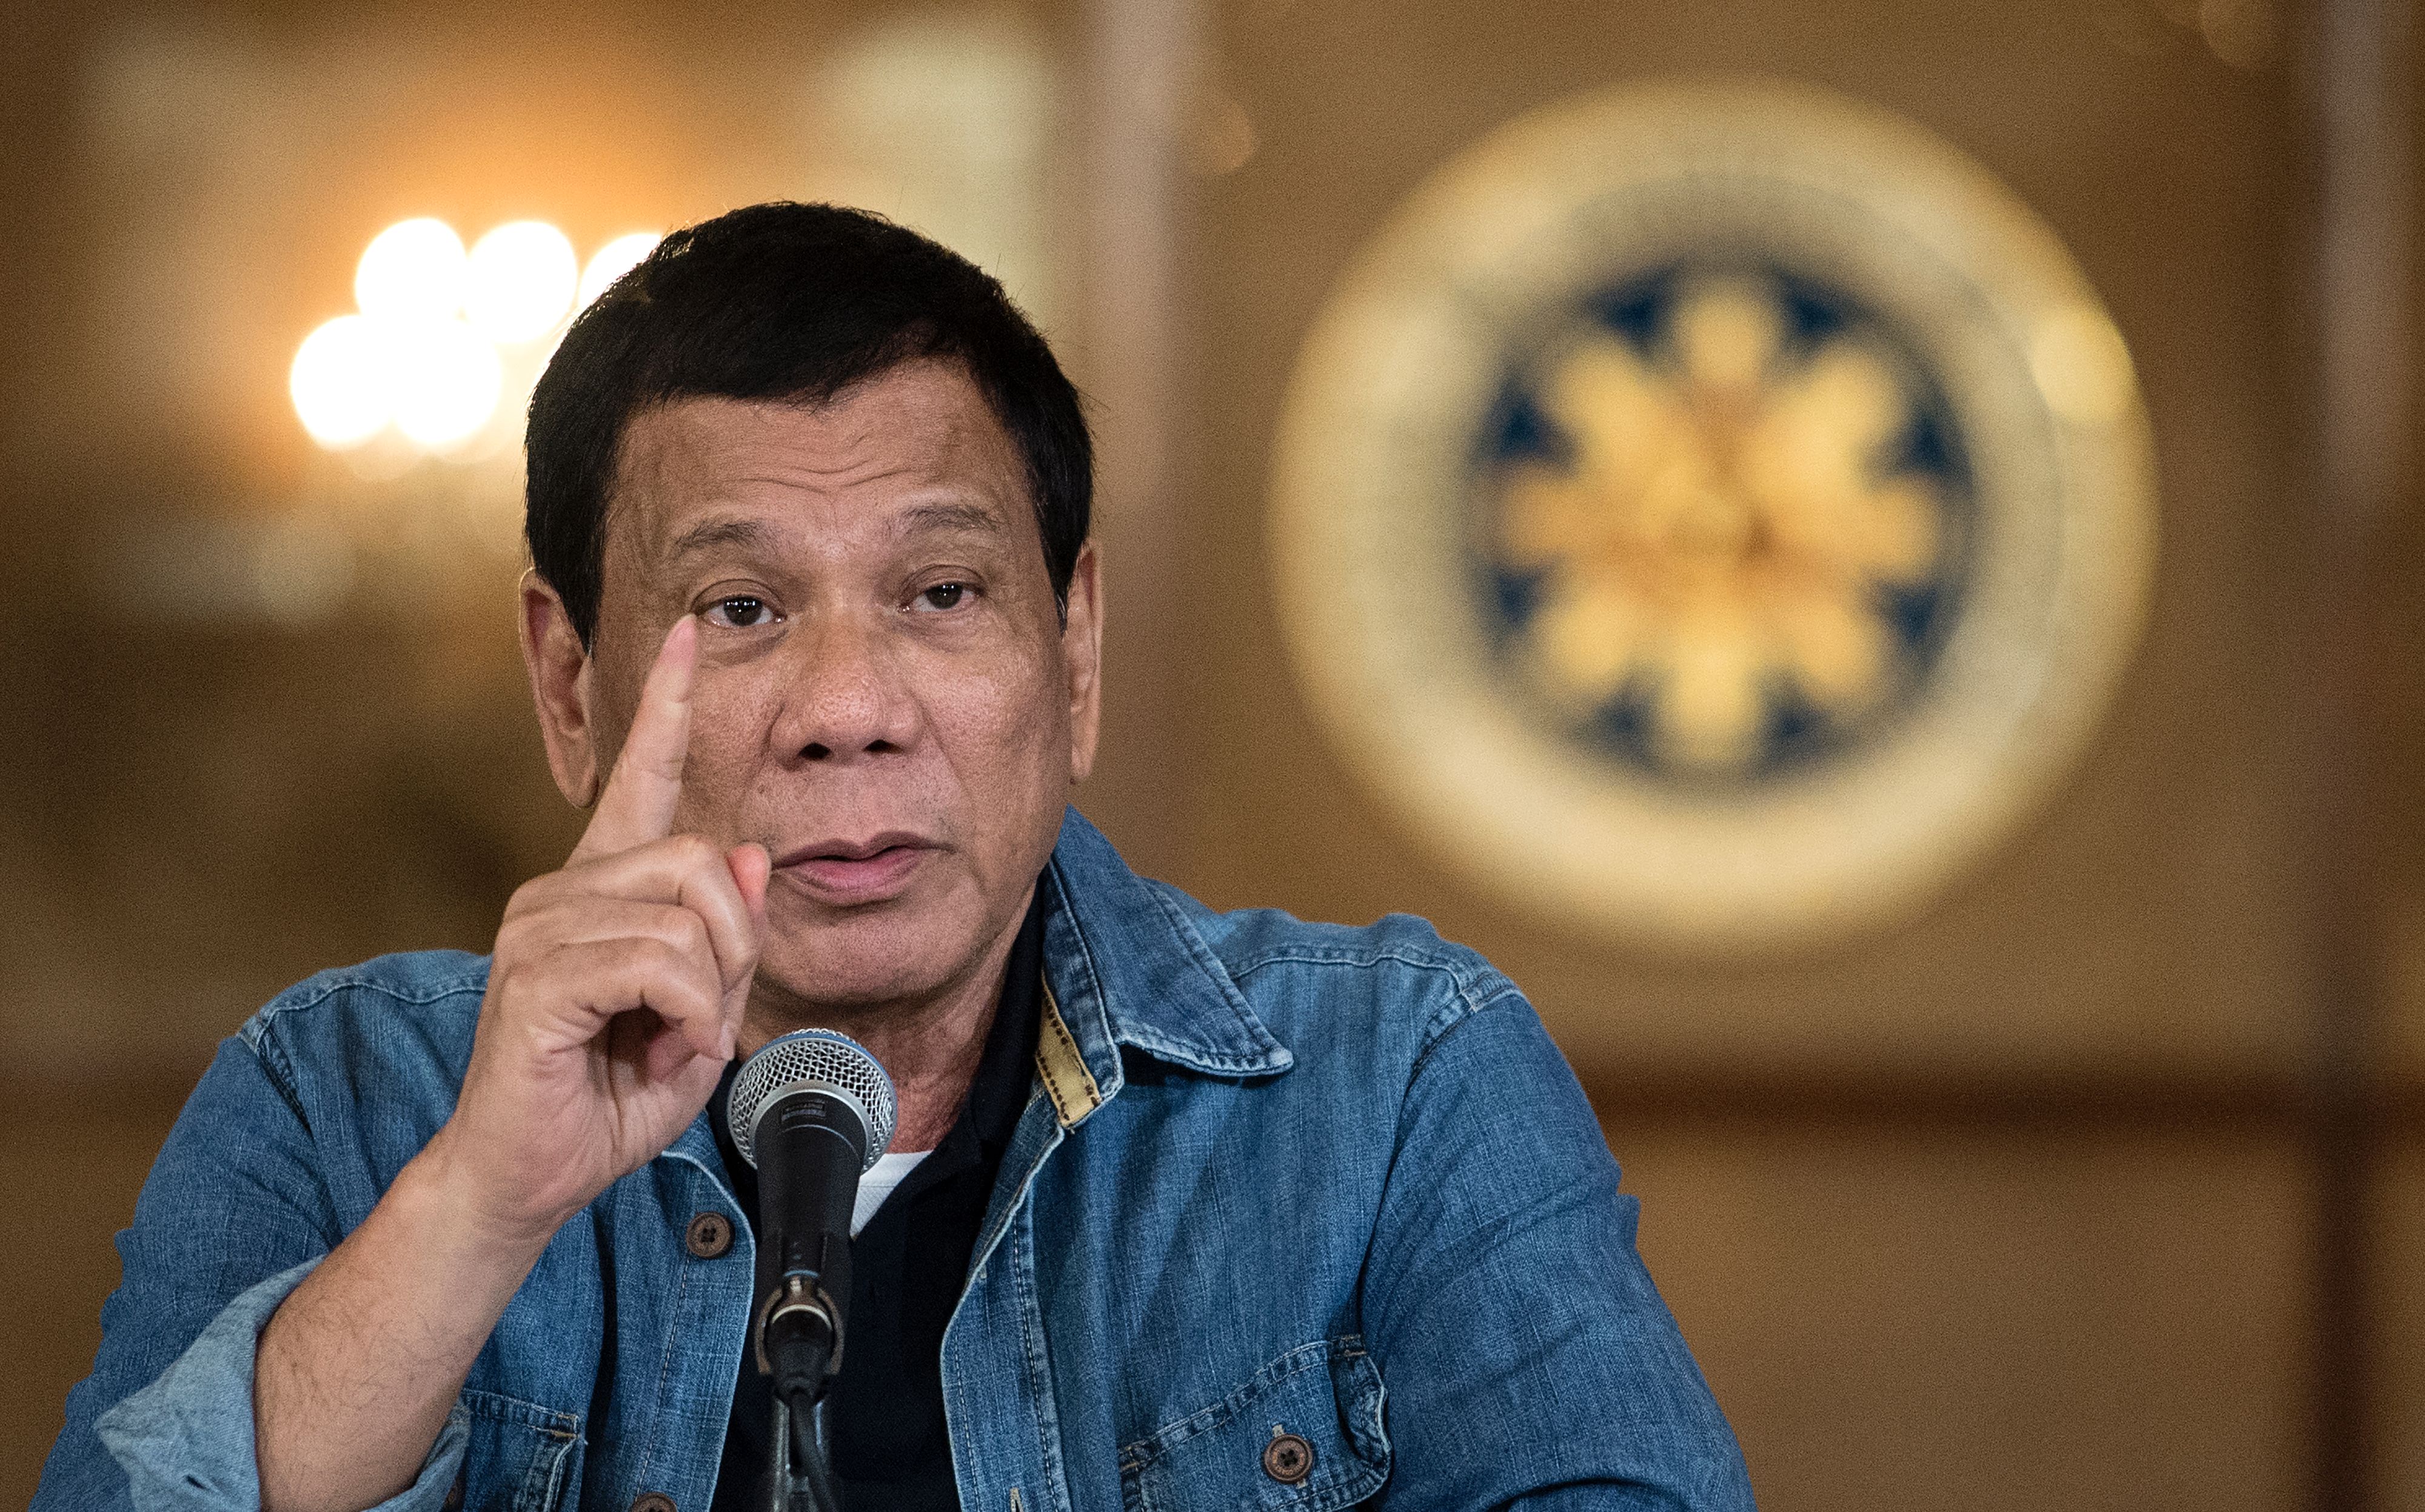 Philippine's President Rodrigo Duterte gestures as he answers a question during a press conference at the Malacanang palace in Manila on January 30, 2017.